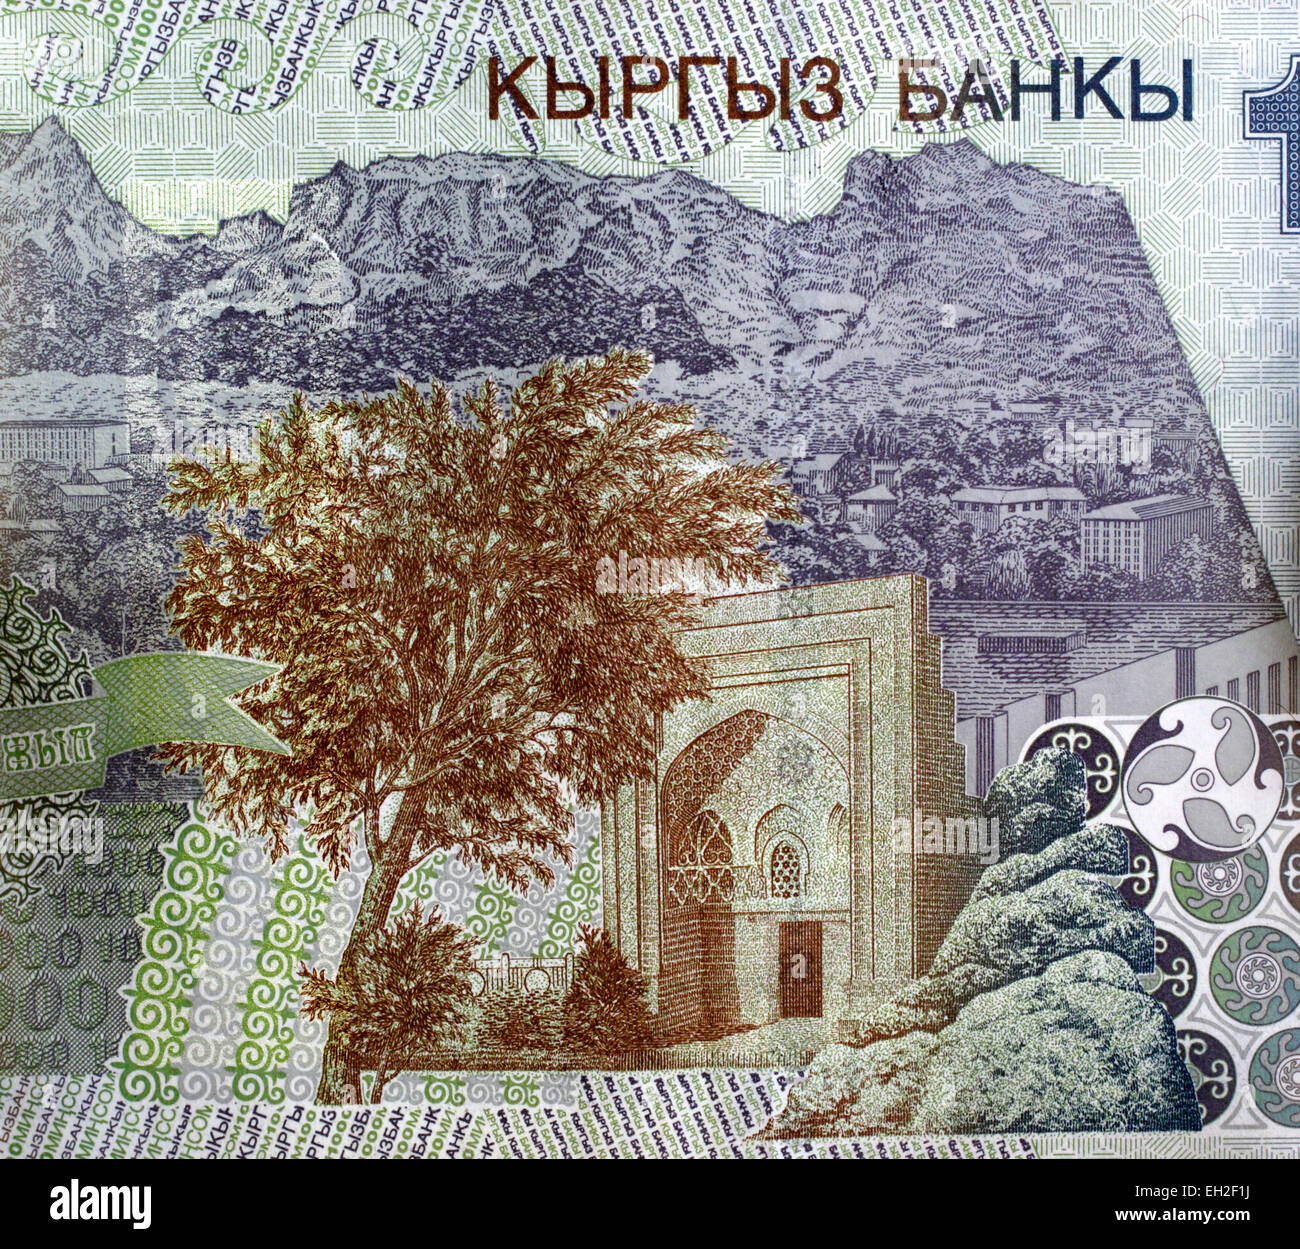 Takhti Sulaiman, Mount Sulaiman from 1000 som banknote, Kyrgyzstan, 2000 Stock Photo